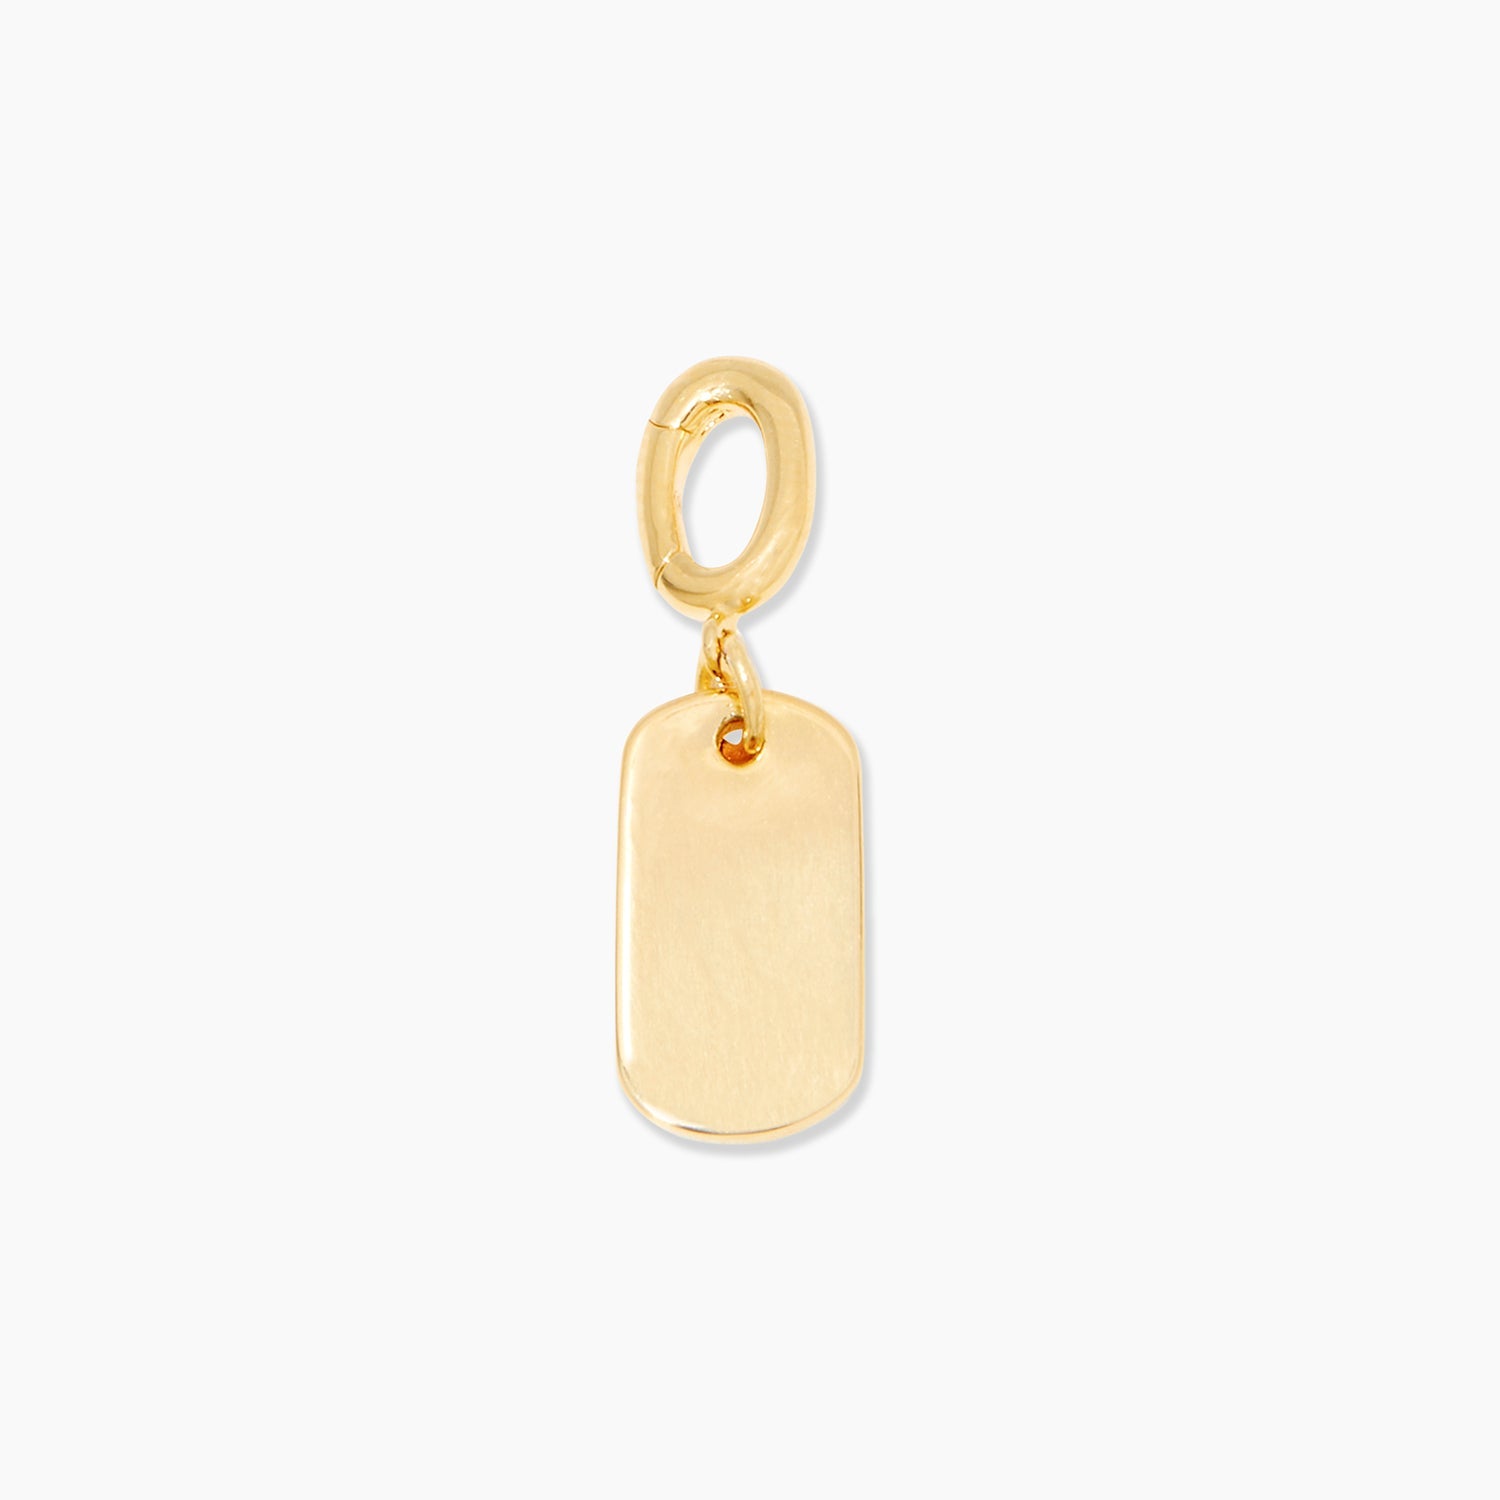 19 Gold gorjana Griffin Dog Tag Charm Necklace – Shol's boutique